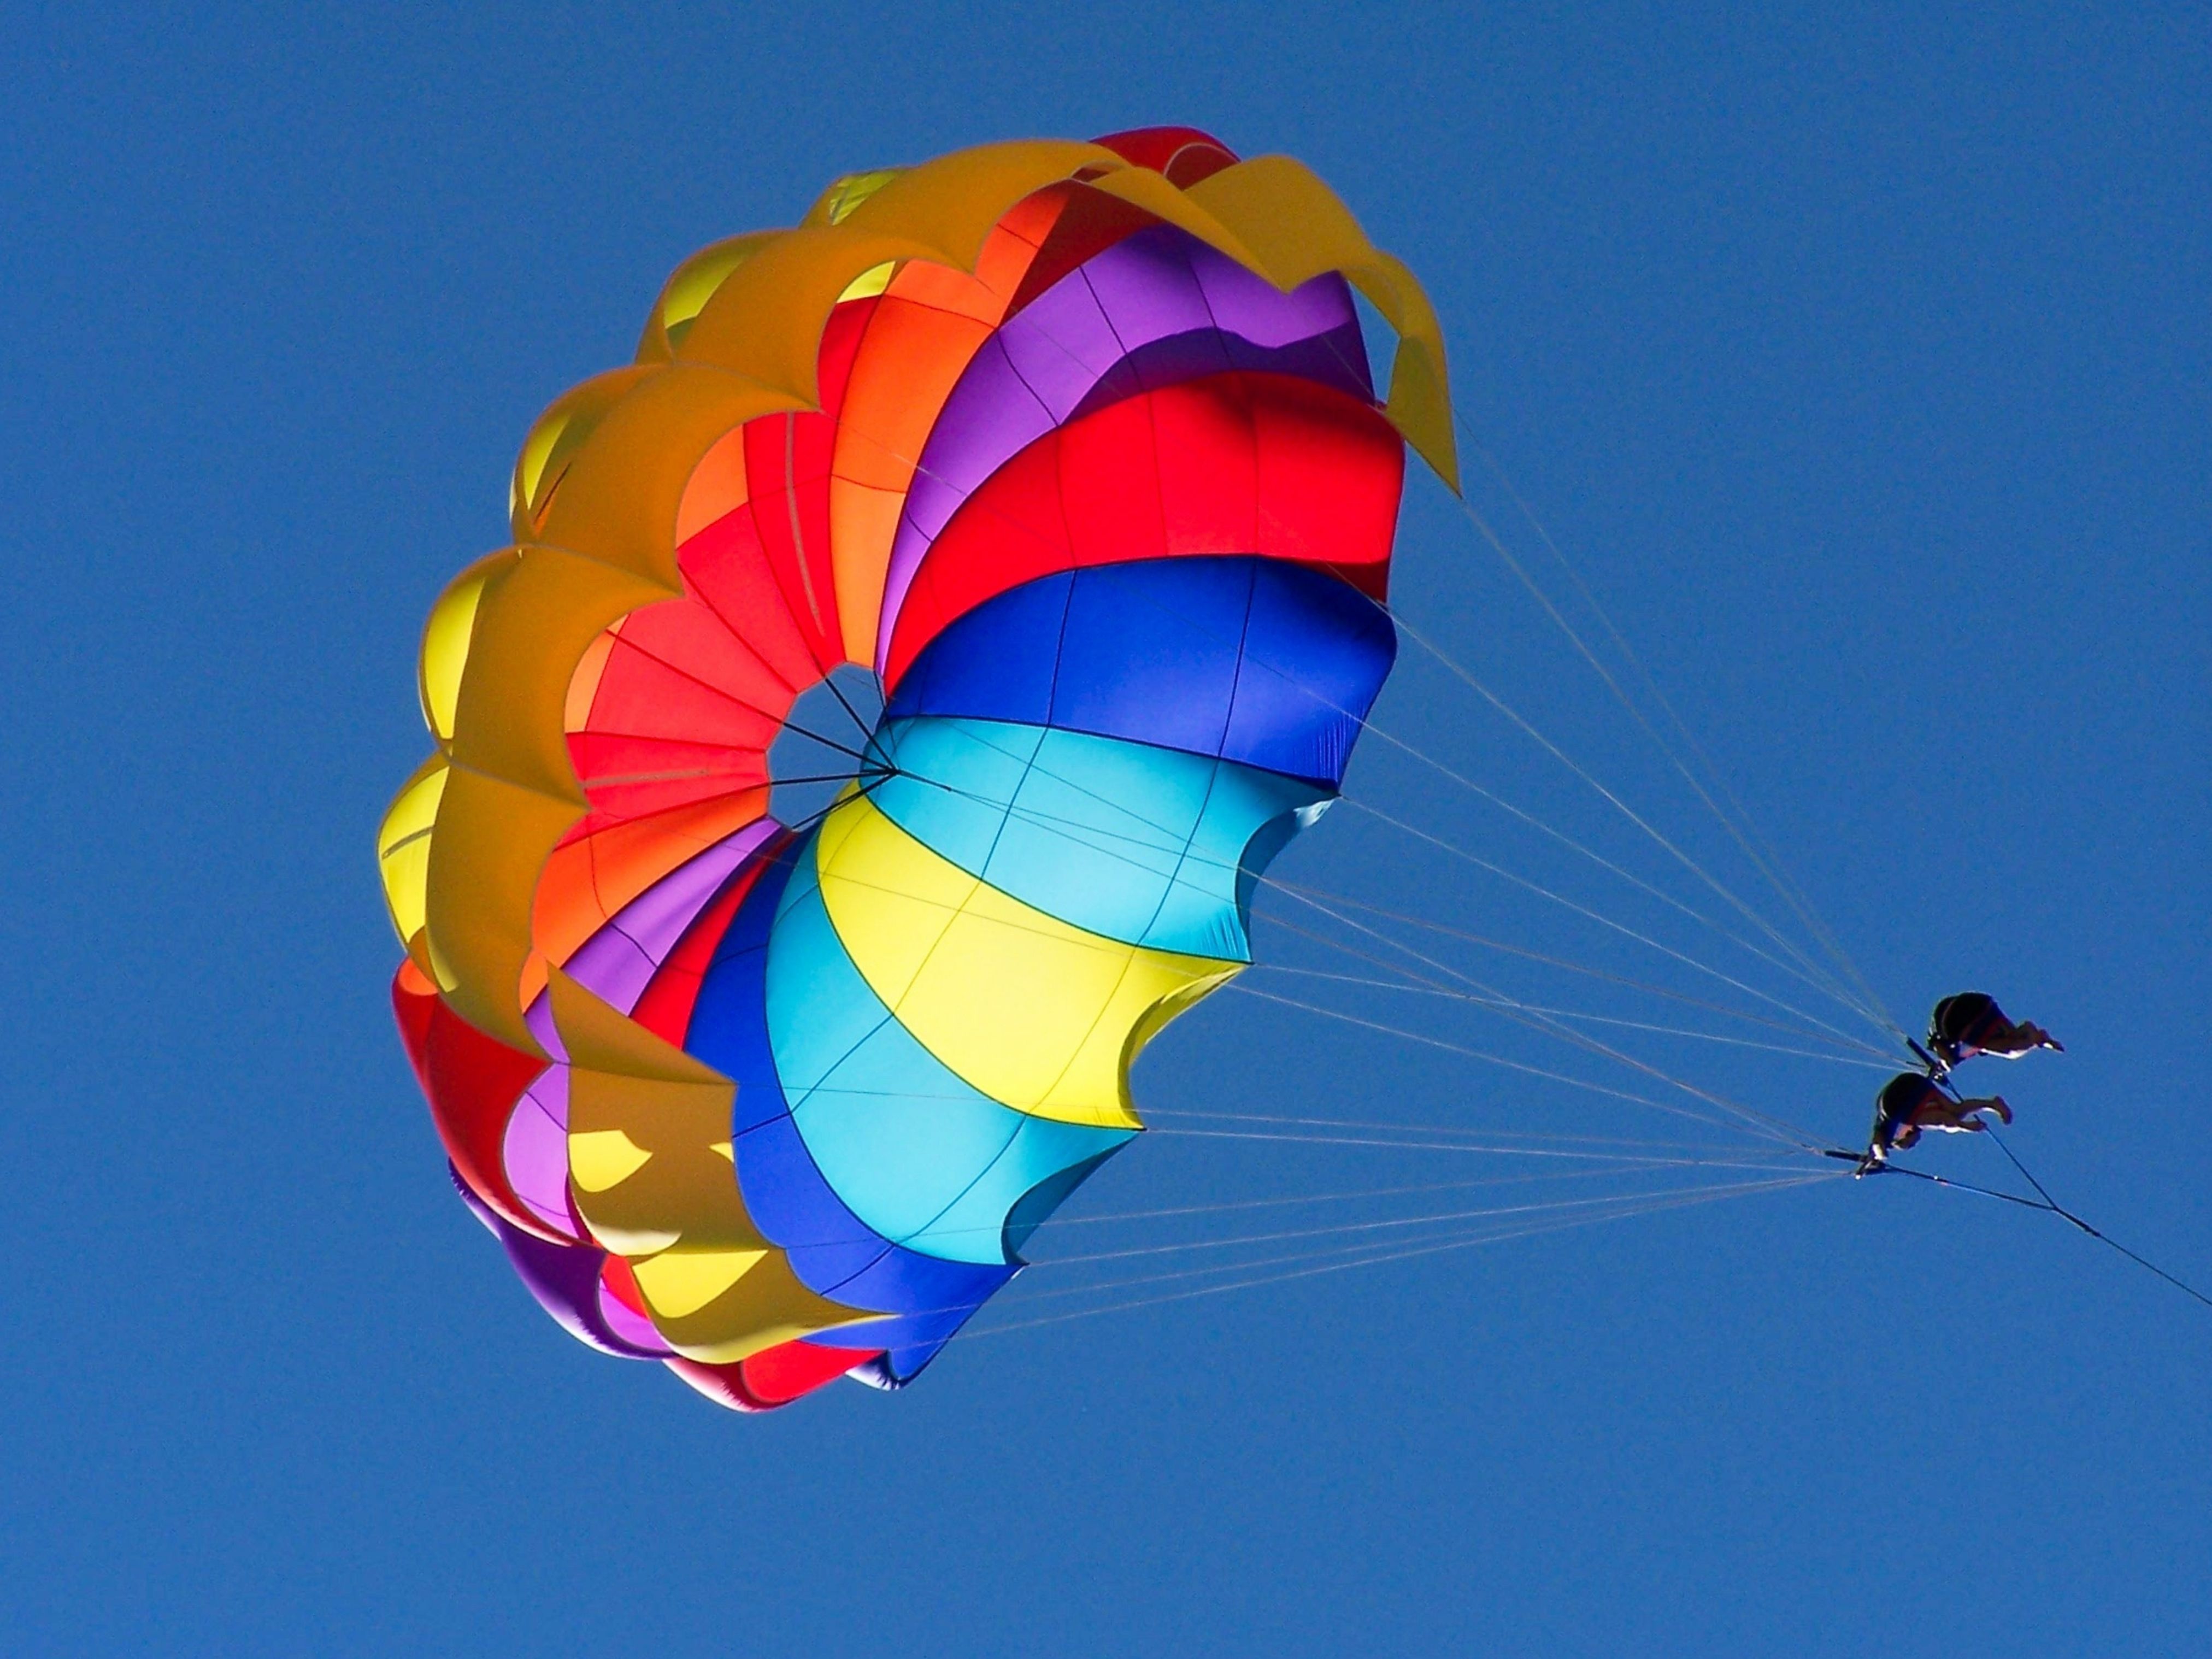 parasailing is one of Maui's best activities for families